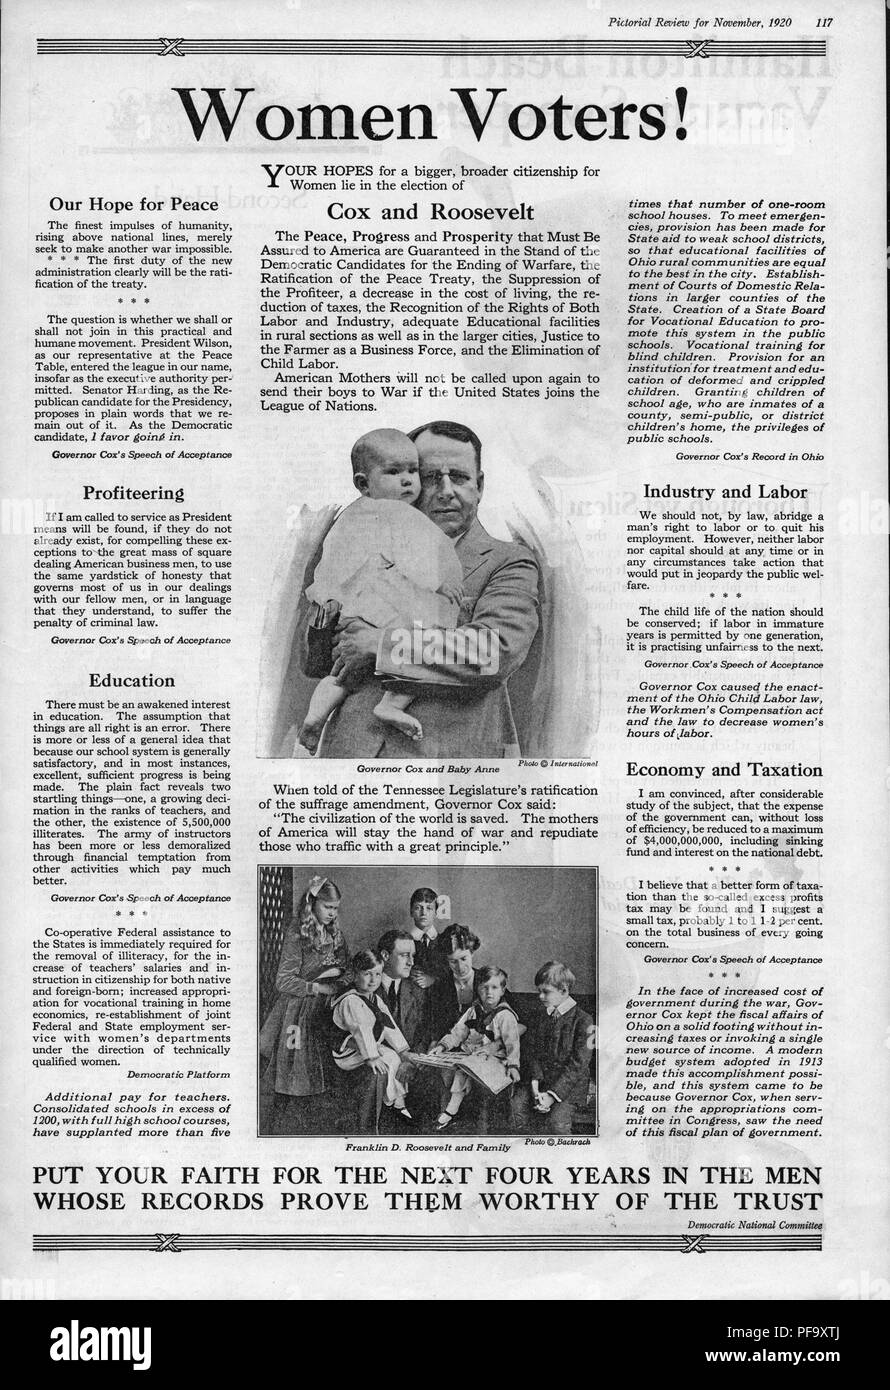 Presidential campaign advertisement for the Democratic team of James M Cox and Franklin D Roosevelt, with black and white photographs of Governor Cox holding his daughter Anne, and Roosevelt surrounded by his large family, with text intended to appeal to the newly enfranchised female voter, published by Pictorial Review for the American market, 1920. () Stock Photo